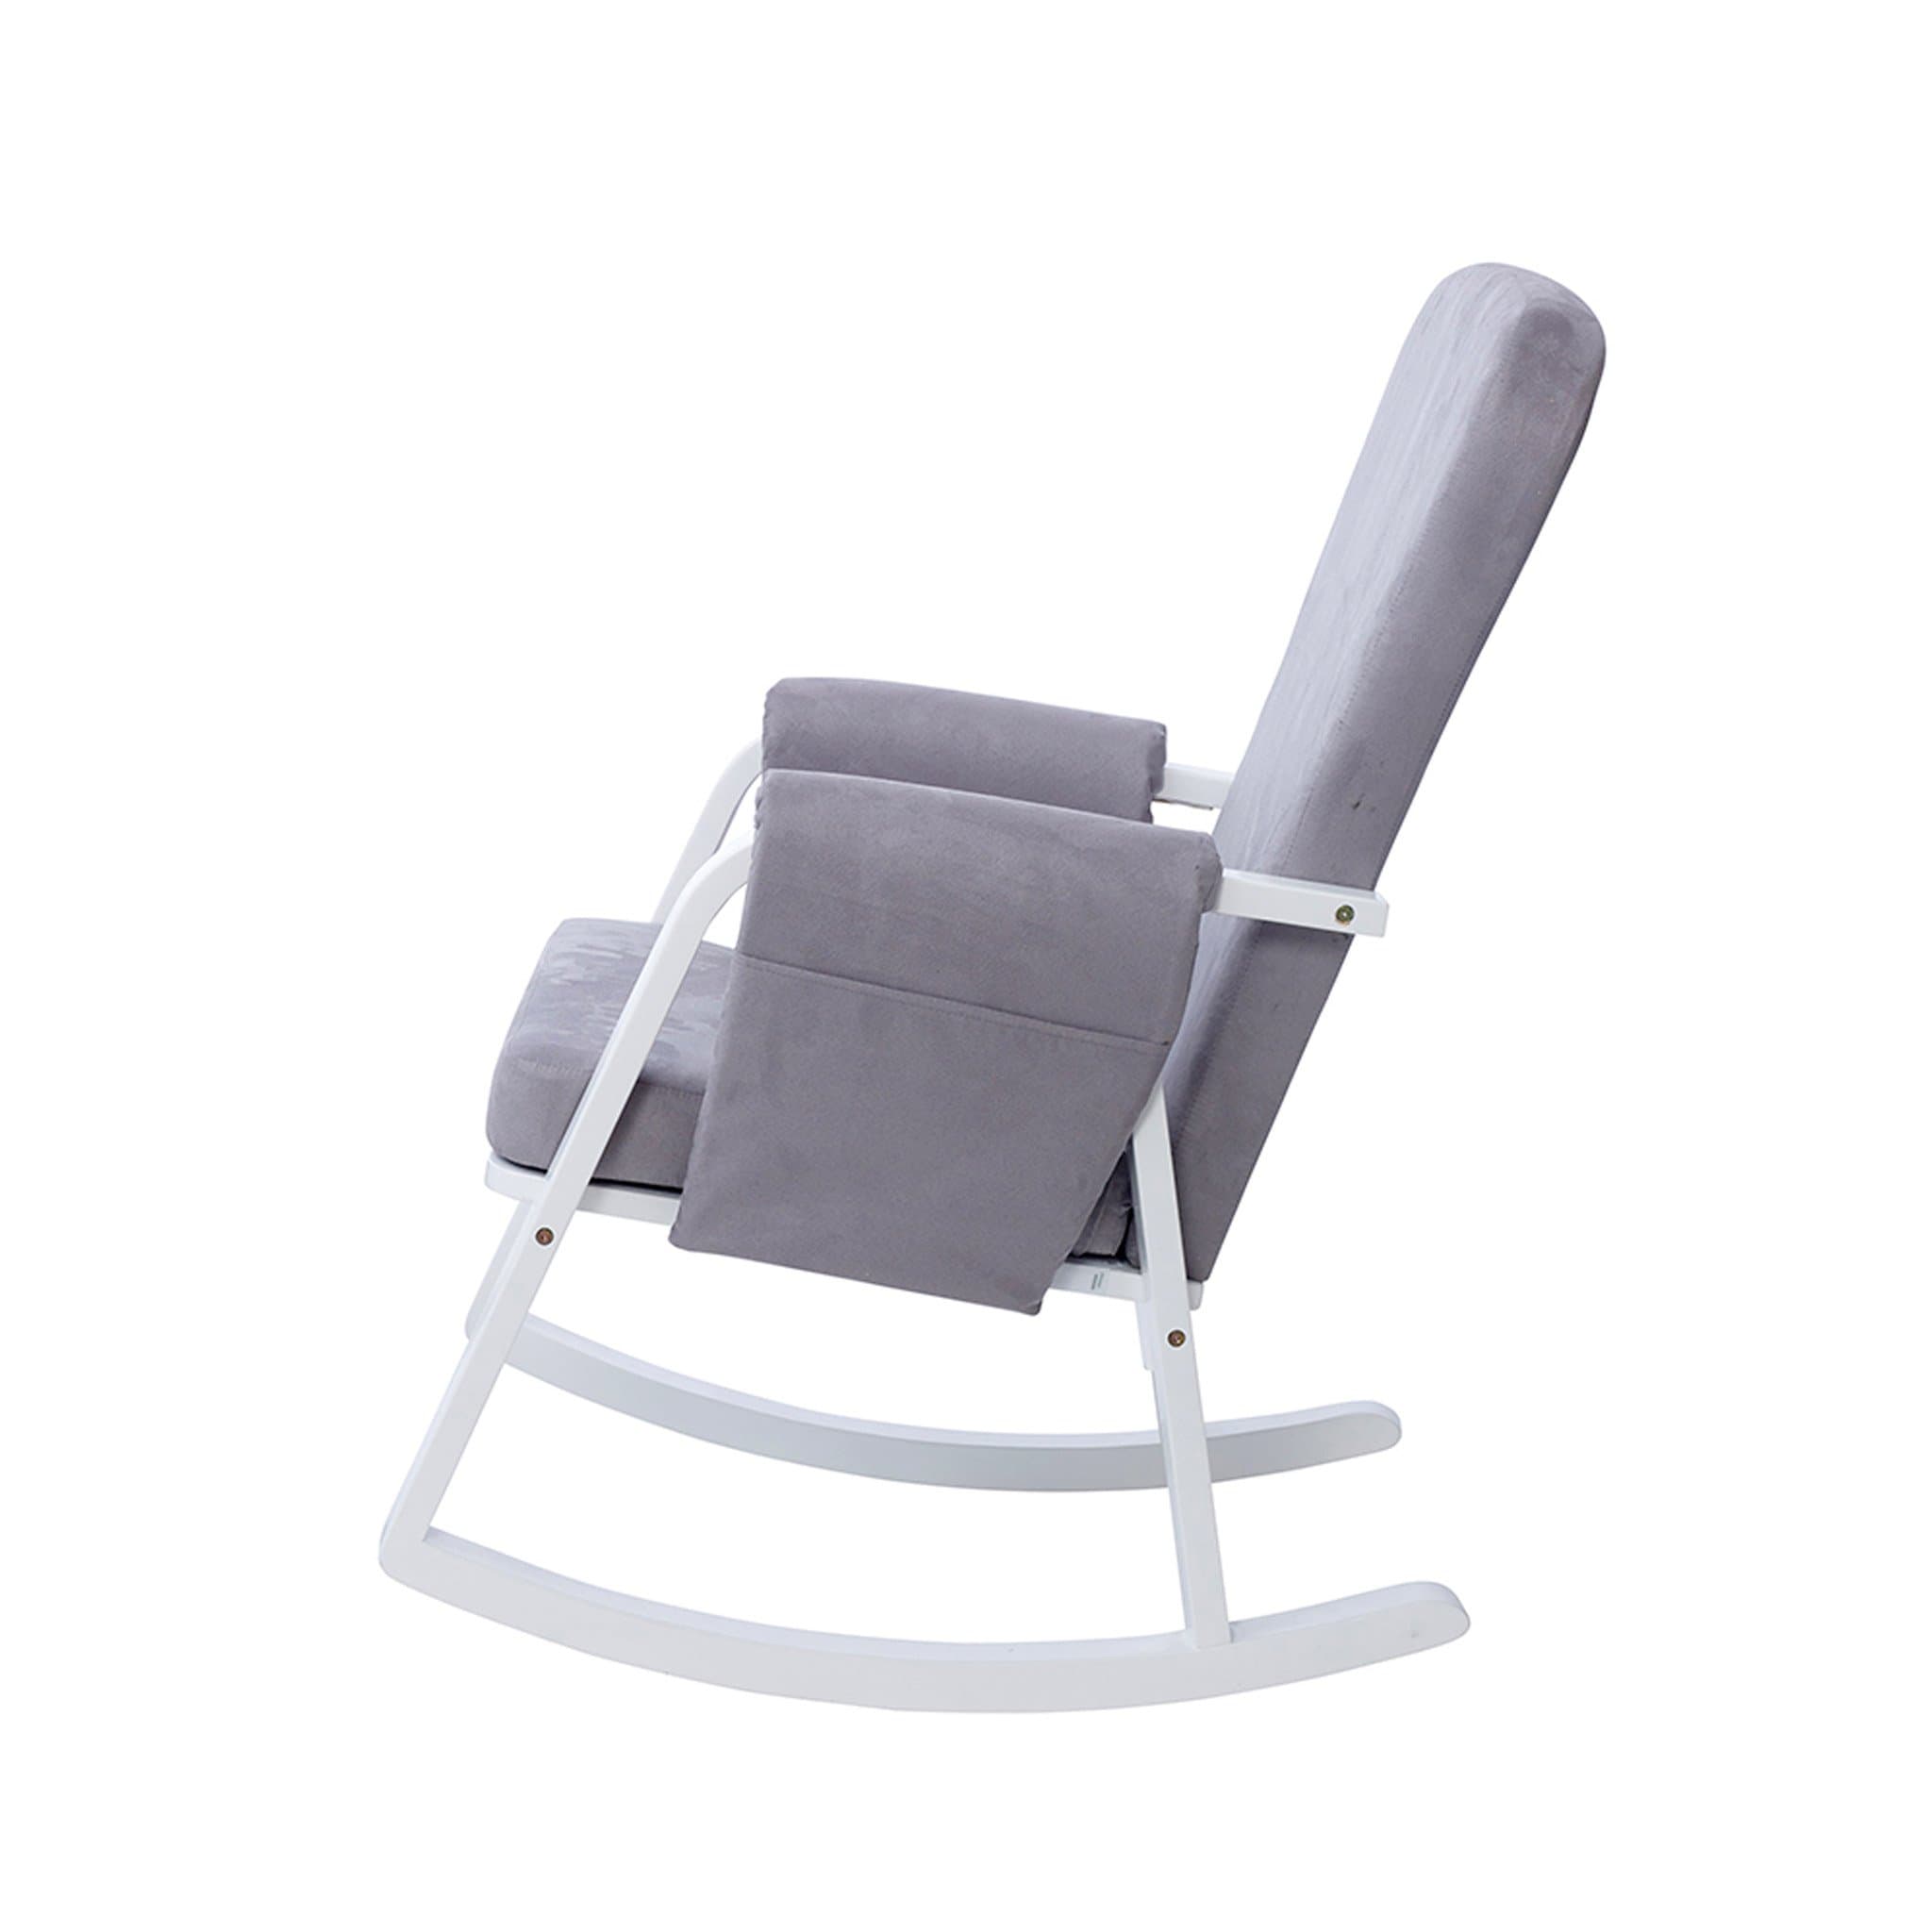 Ickle Bubba nursing chairs Ickle Bubba Dursley Rocking Chair and Stool Pearl Grey 48-005-000-840